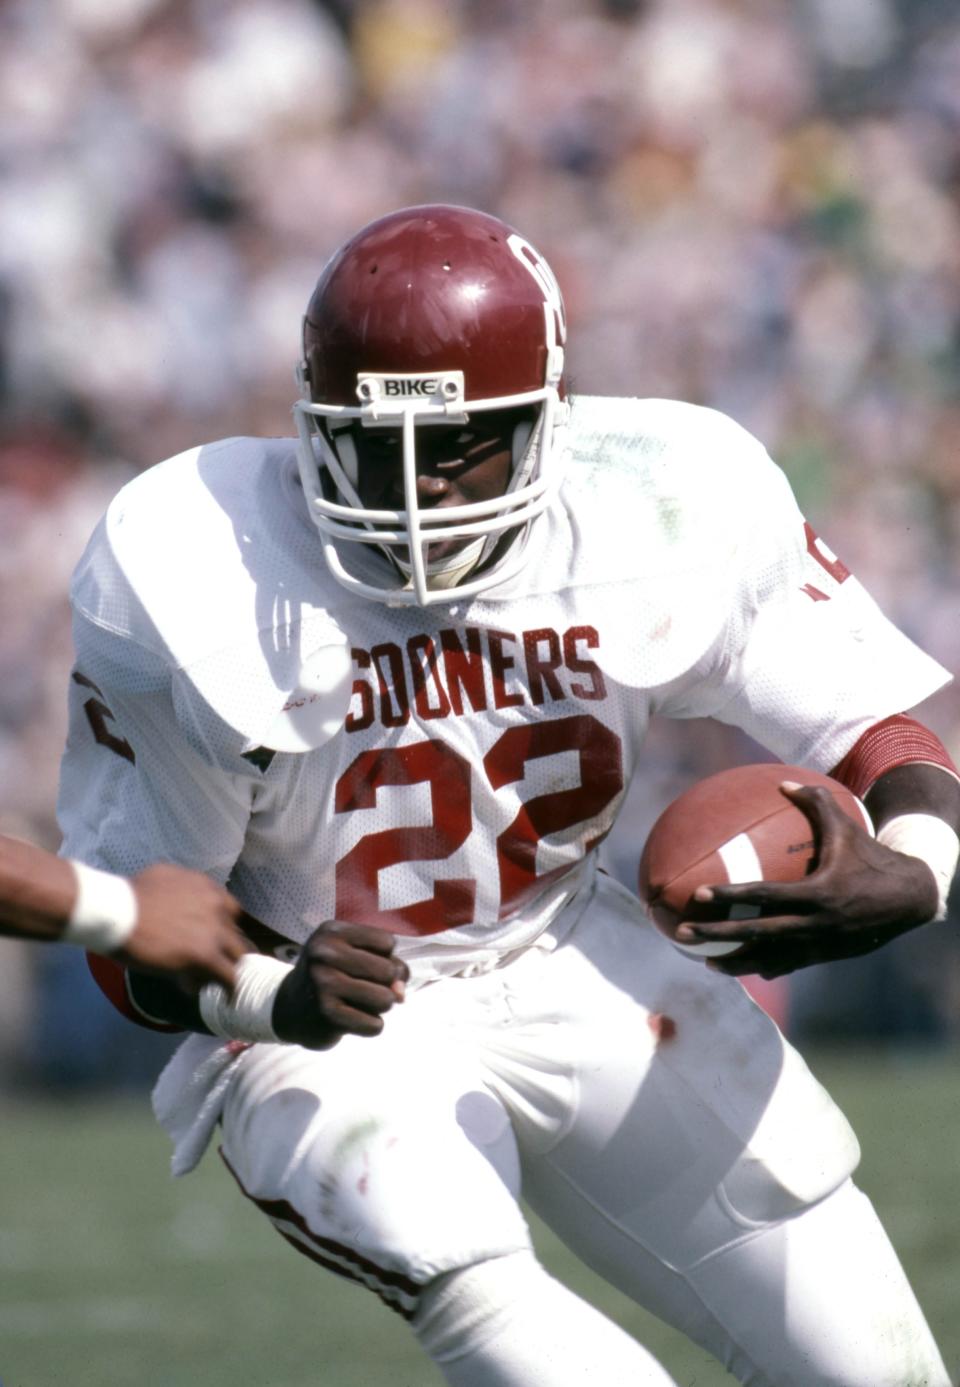 Former Oklahoma running back Marcus Dupree is shown in this September 1982 photo against the Kentucky Wildcats.